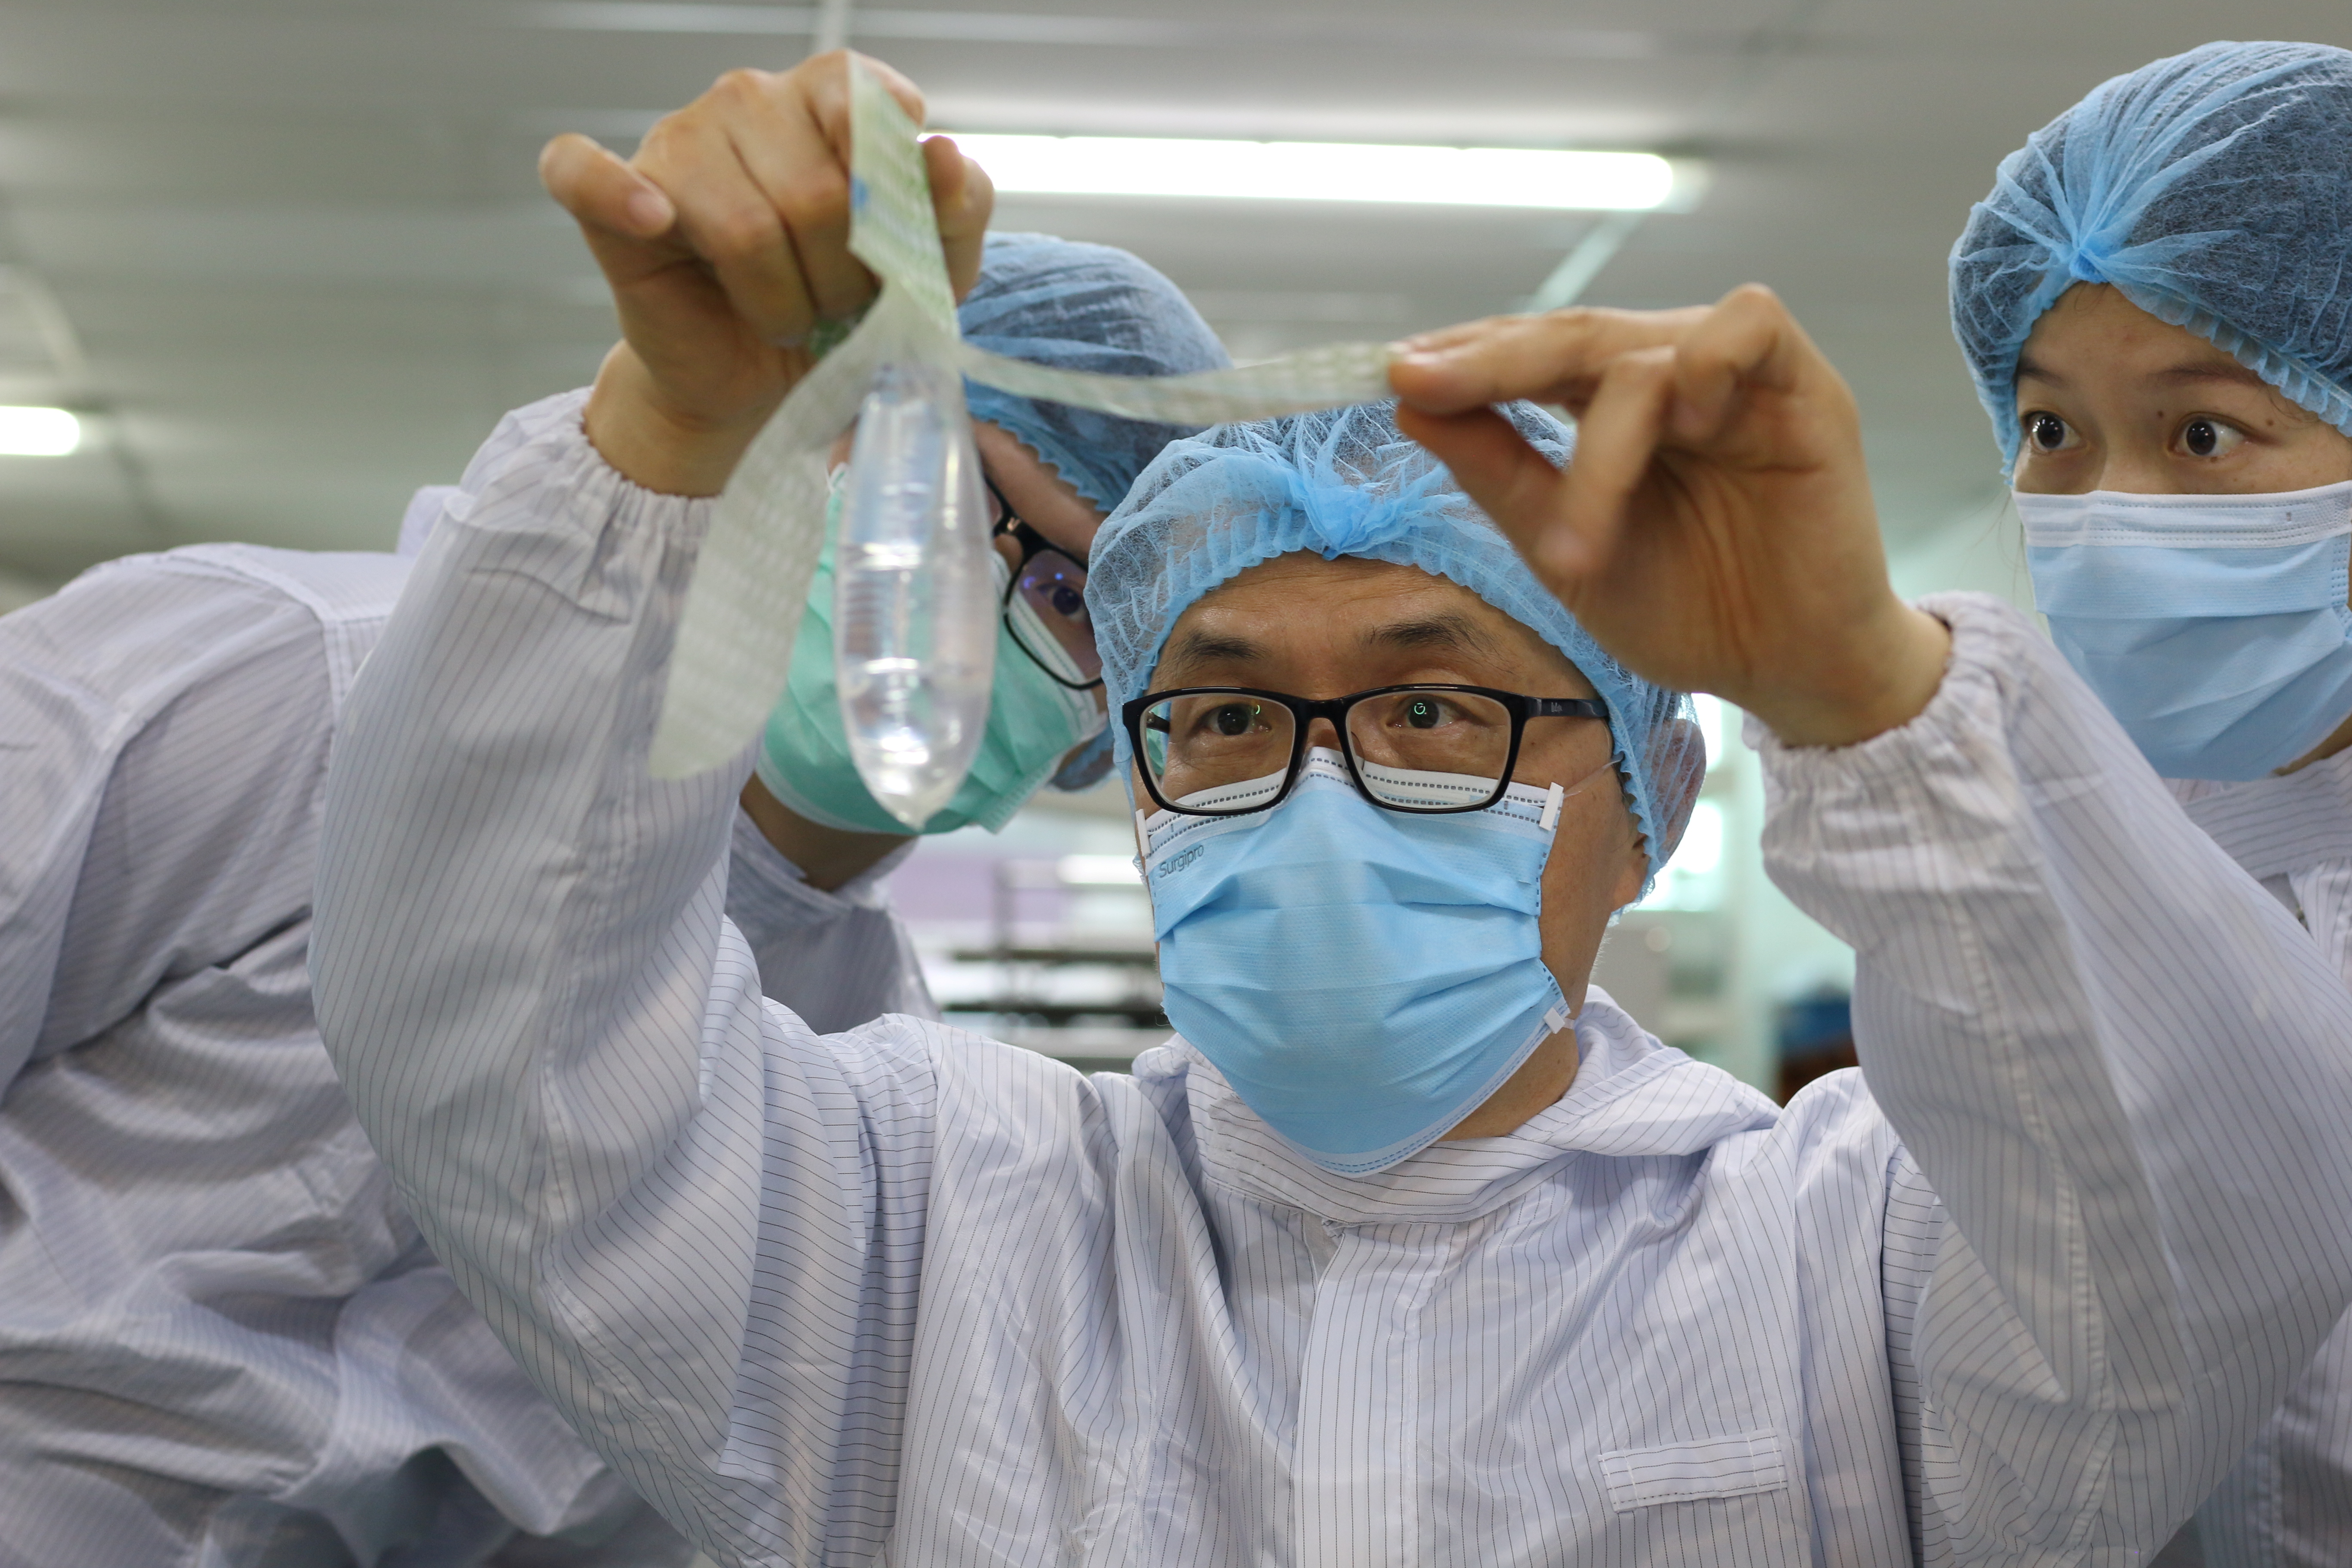 Founder and inventor of Wondaleaf Unisex Condom John Tang Ing Ching inspects the unisex condom at his factory in Sibu, Malaysia October 19, 2021. Twin Catalyst/Handout via REUTERS 